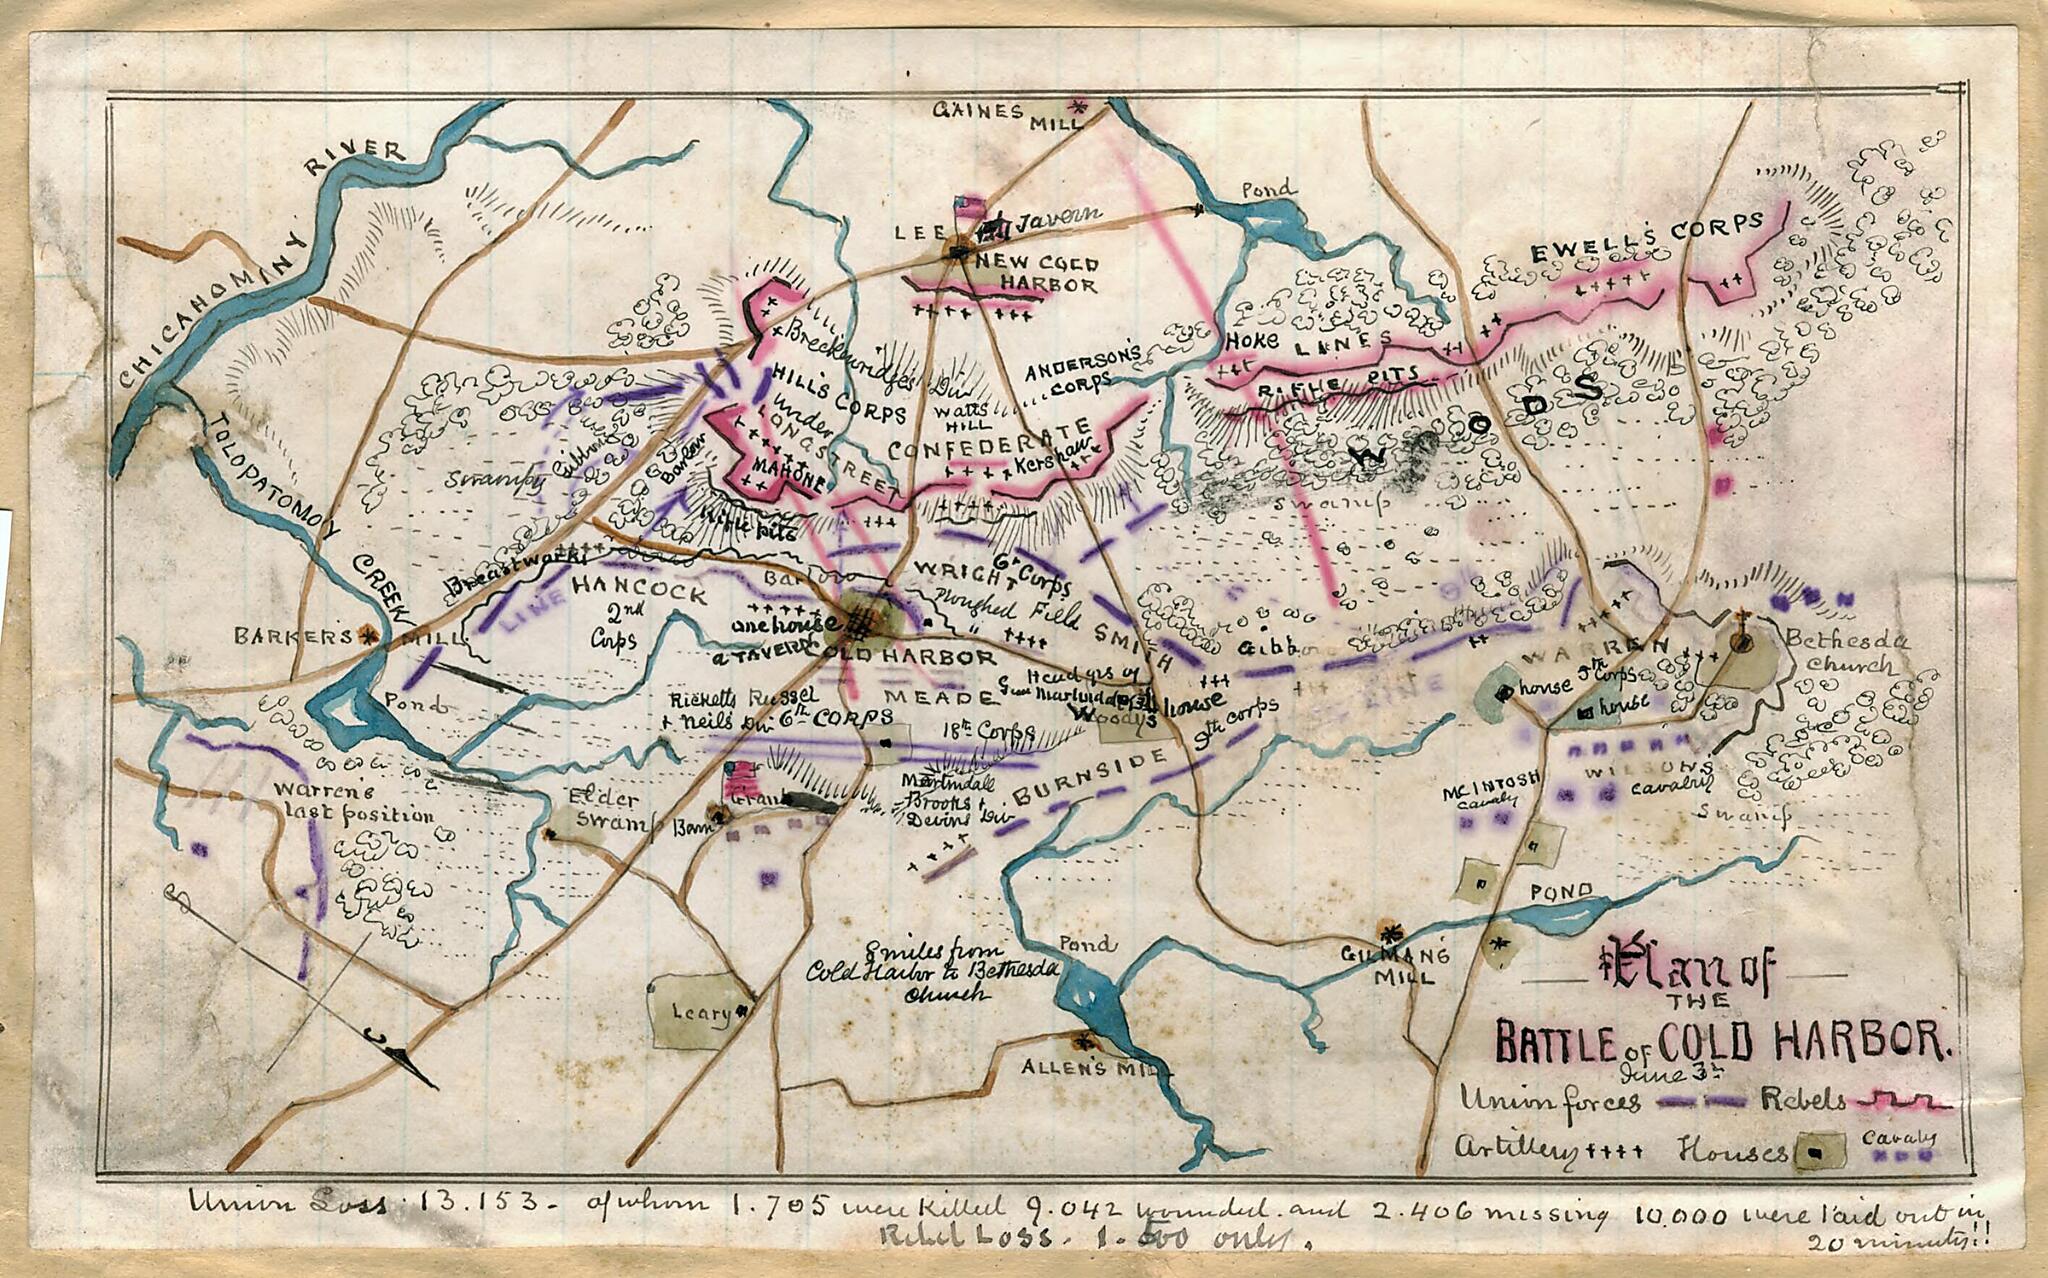 This old map of Plan of the Battle of Cold Harbor, June 3rd from 06-03 was created by Robert Knox Sneden in 06-03